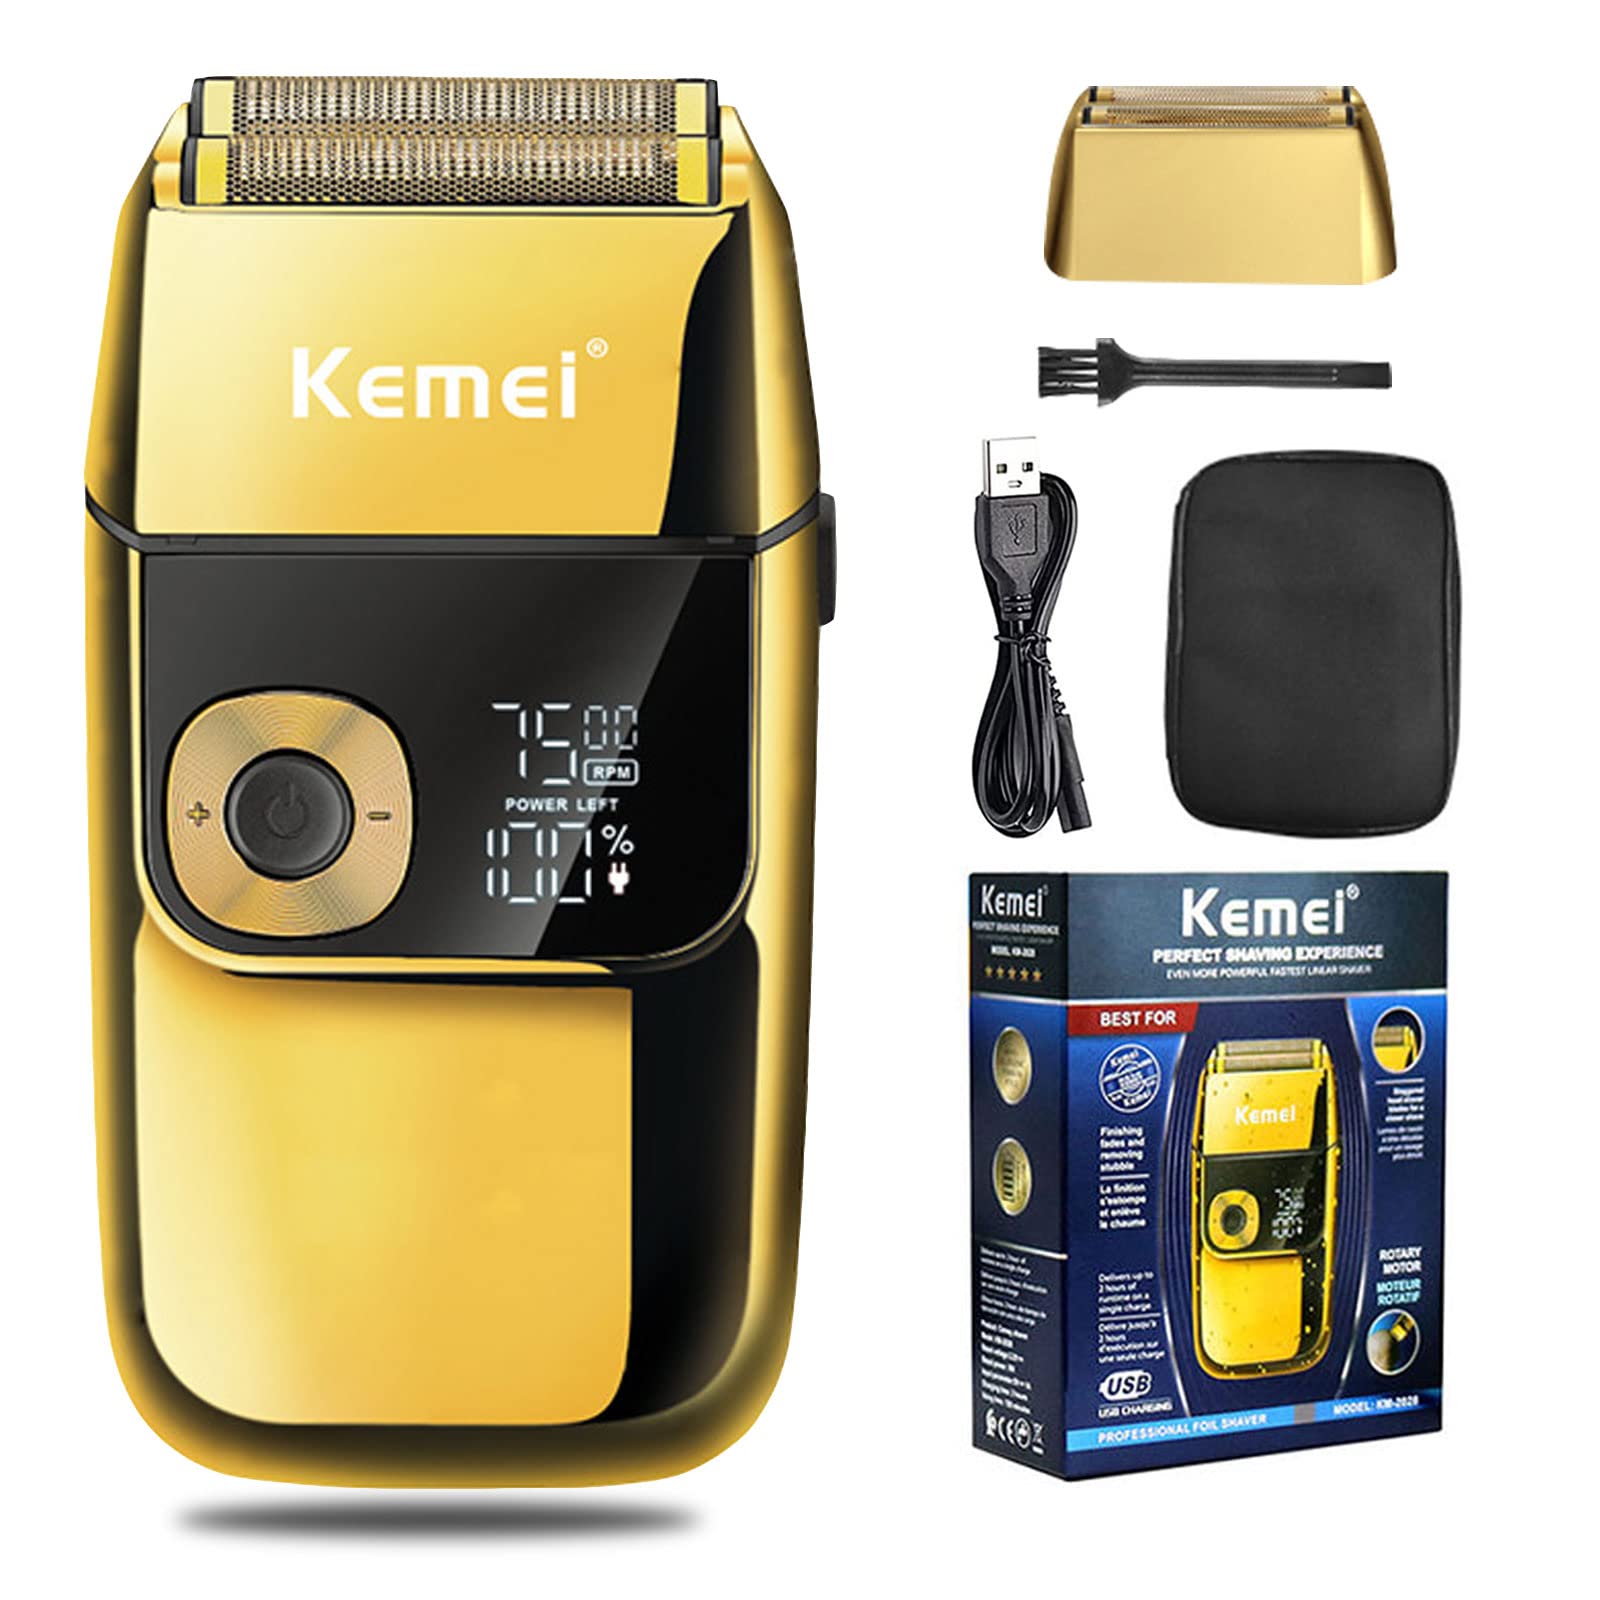 KEMEI Electric foil Shavers for Men, LCD Display Cordless Men's Razors, USB  Rechargeable with Pop-up